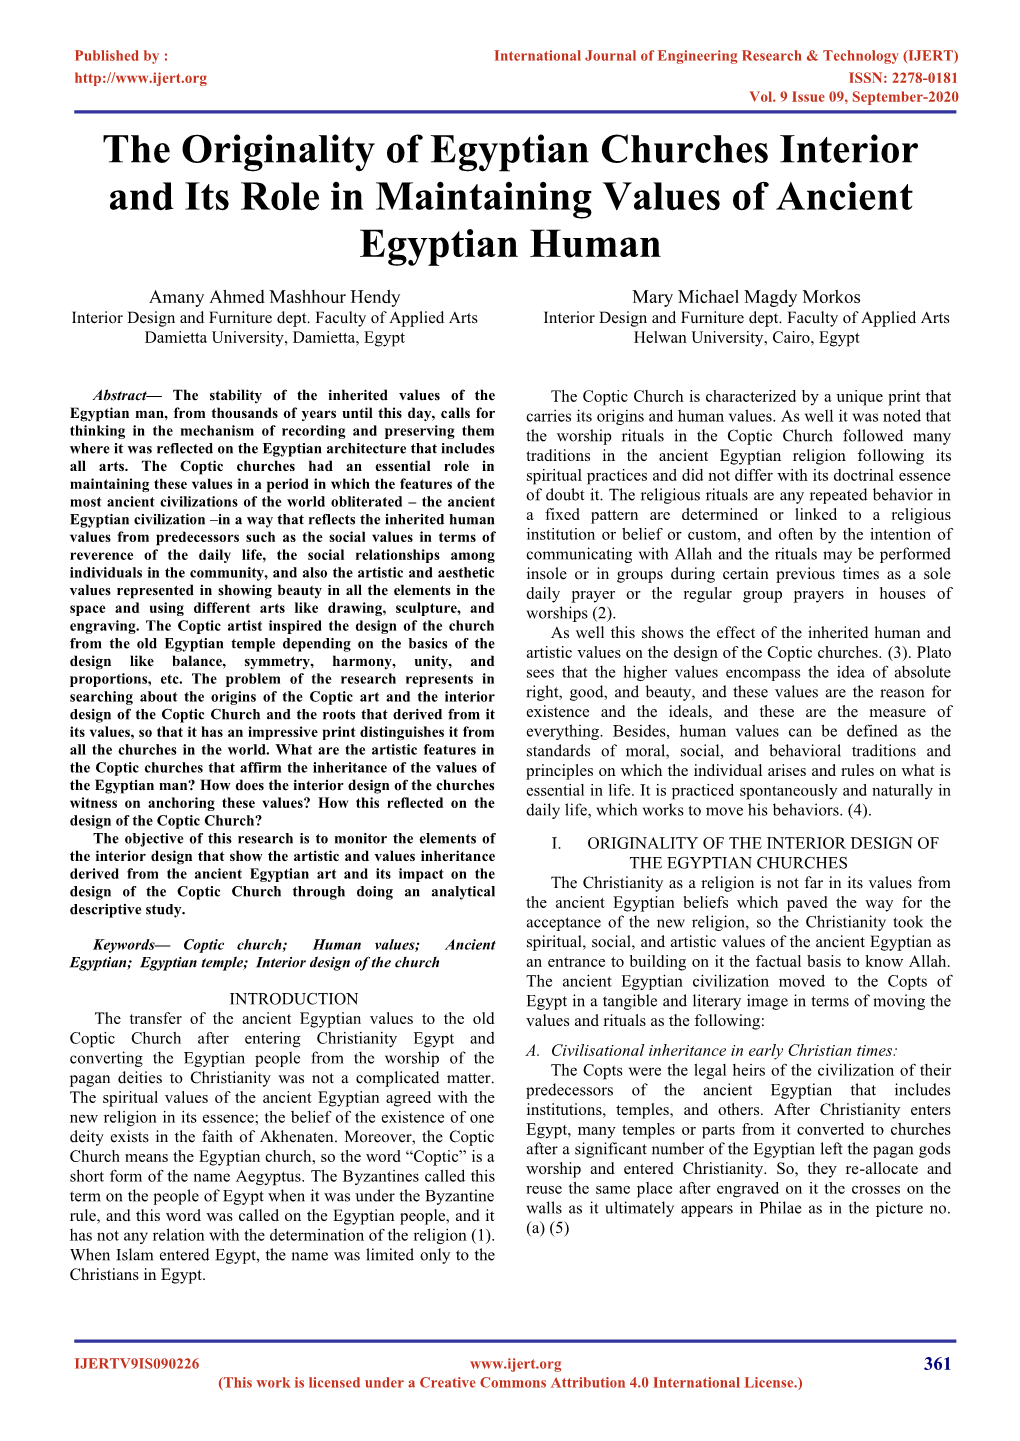 The Originality of Egyptian Churches Interior and Its Role in Maintaining Values of Ancient Egyptian Human